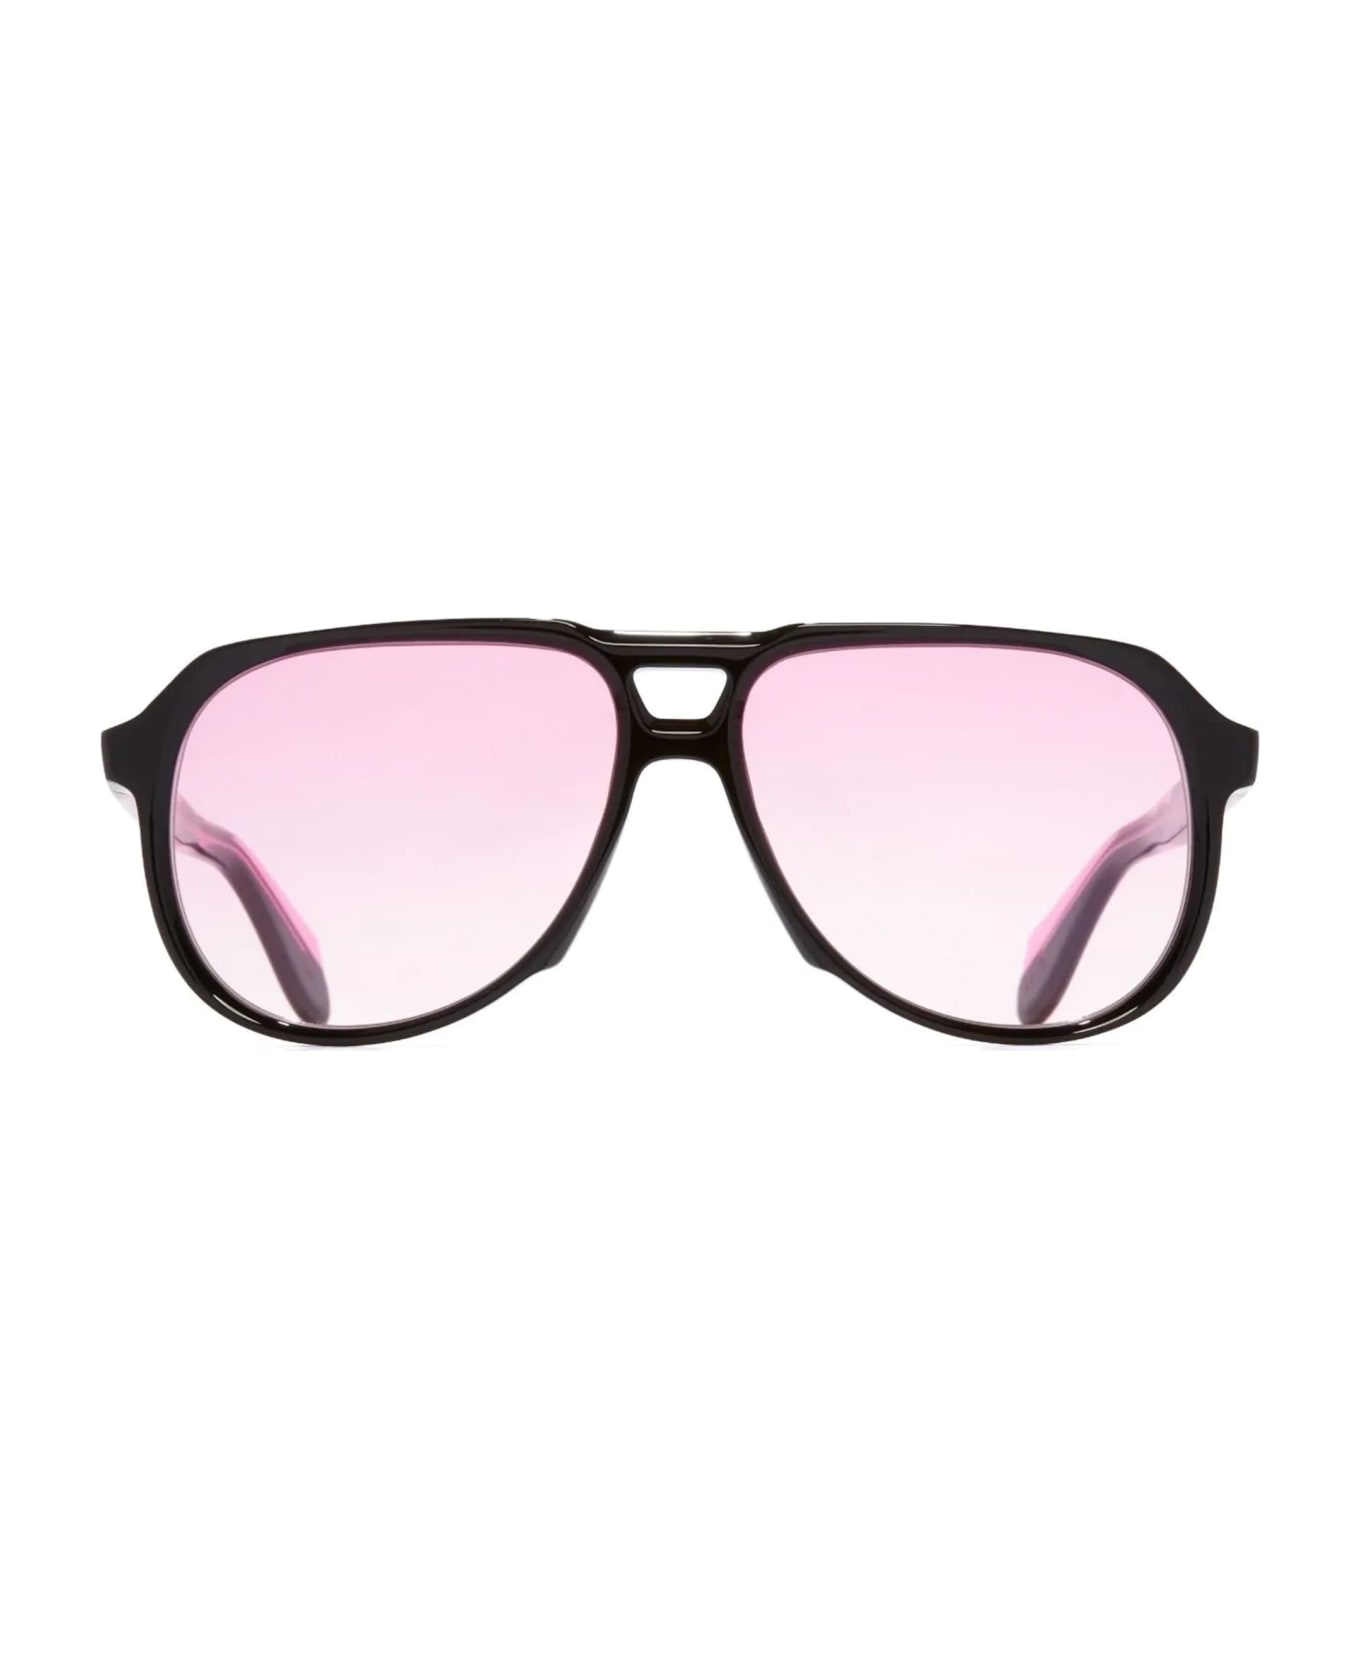 Cutler and Gross 9782 / Black On Pink Sunglasses - black/pink サングラス